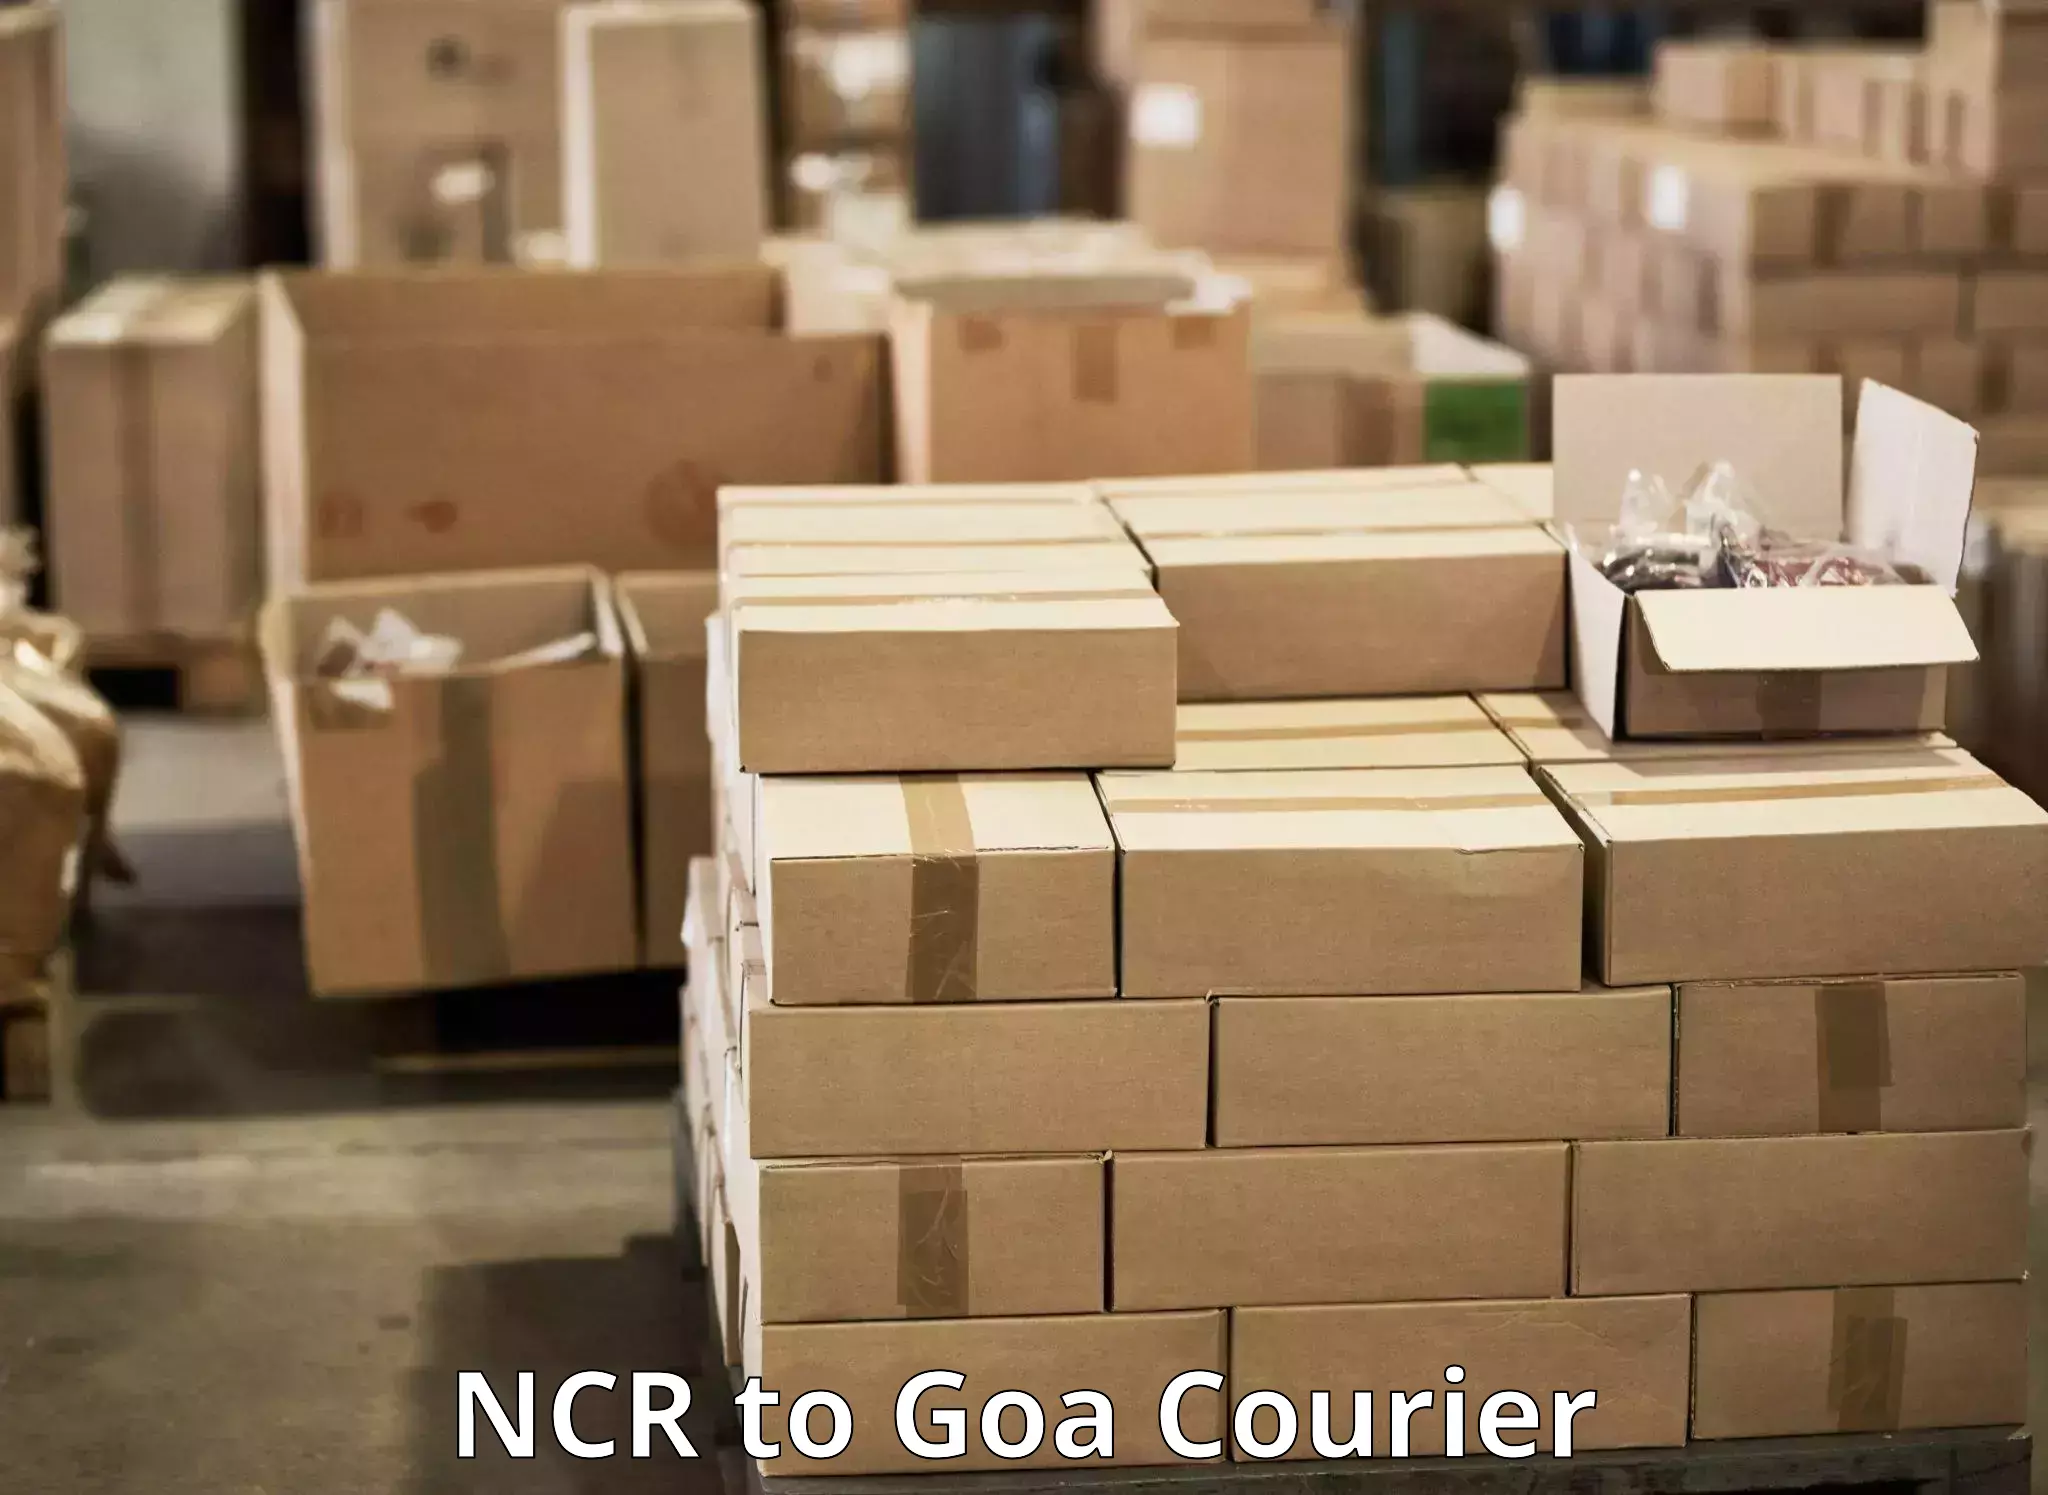 Customer-focused courier NCR to Goa University